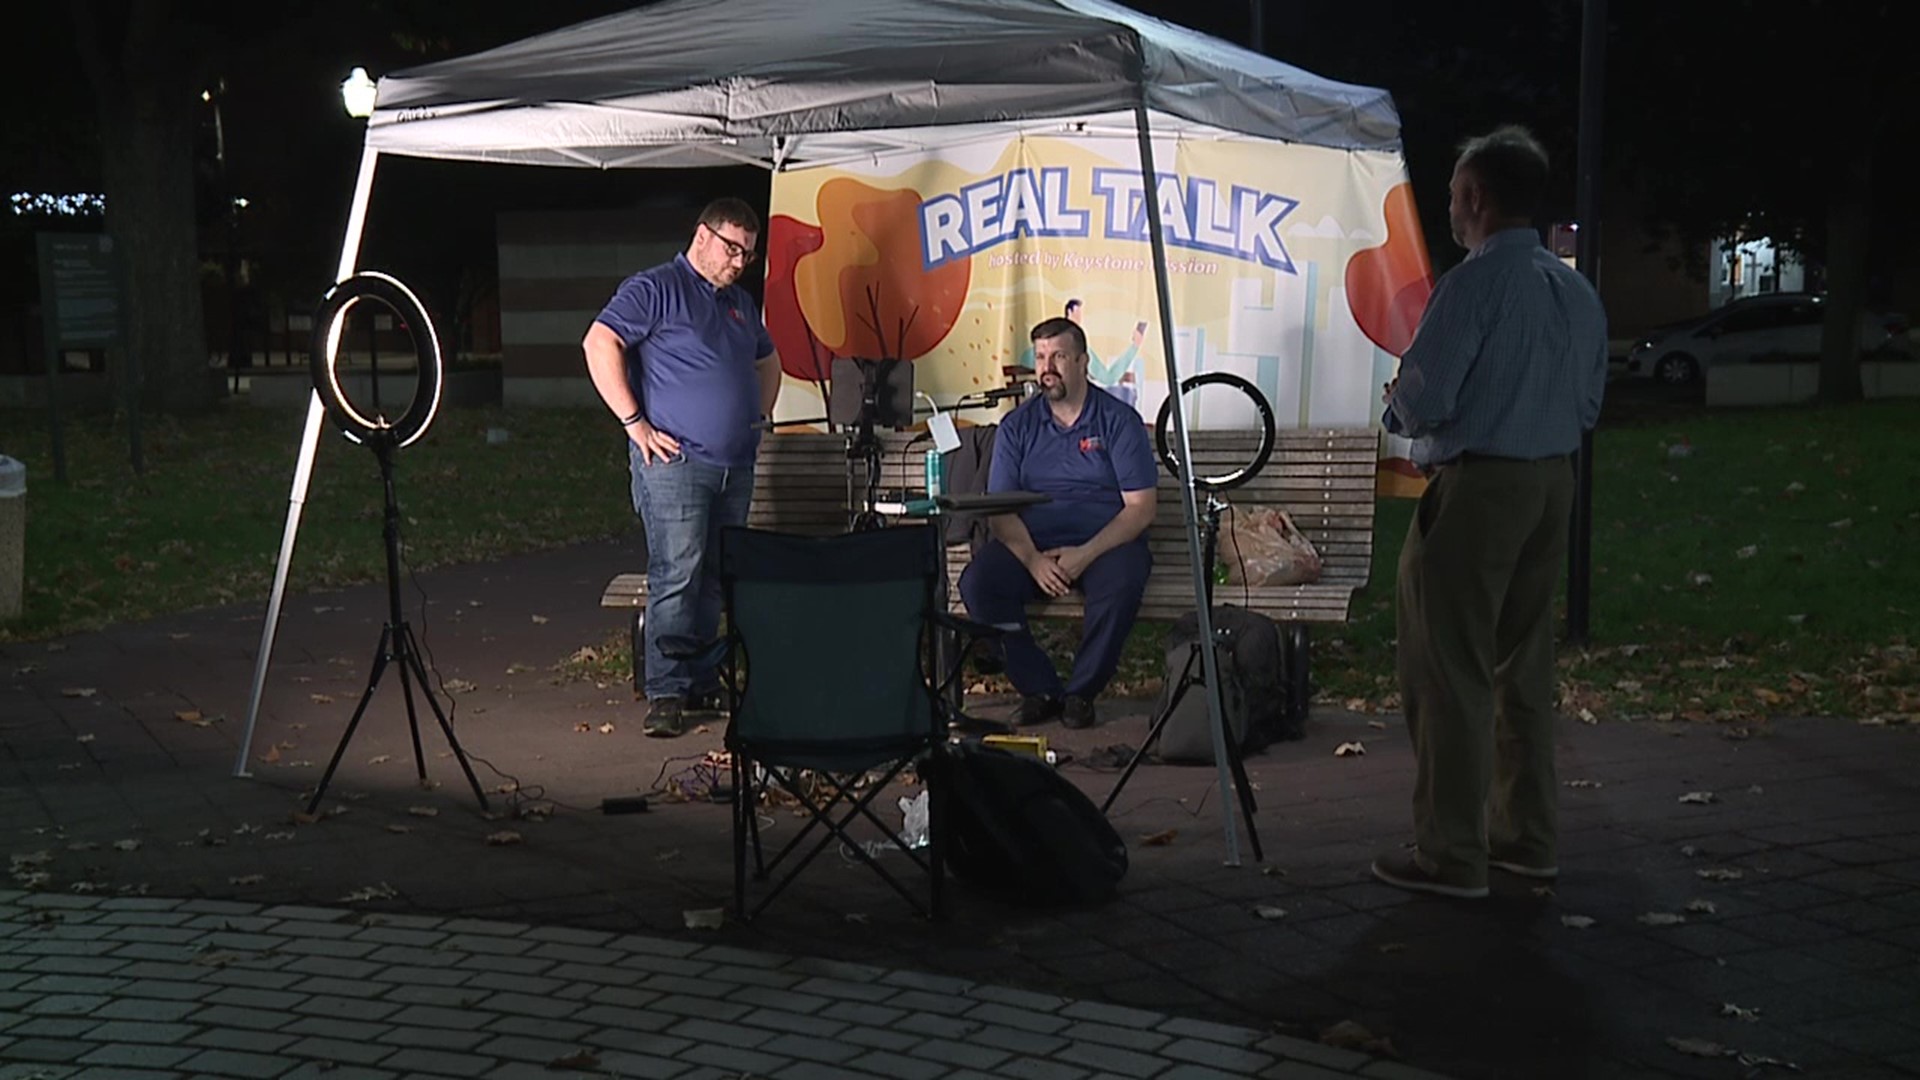 Keystone Mission held the Real Talk event to get people talking about homelessness.